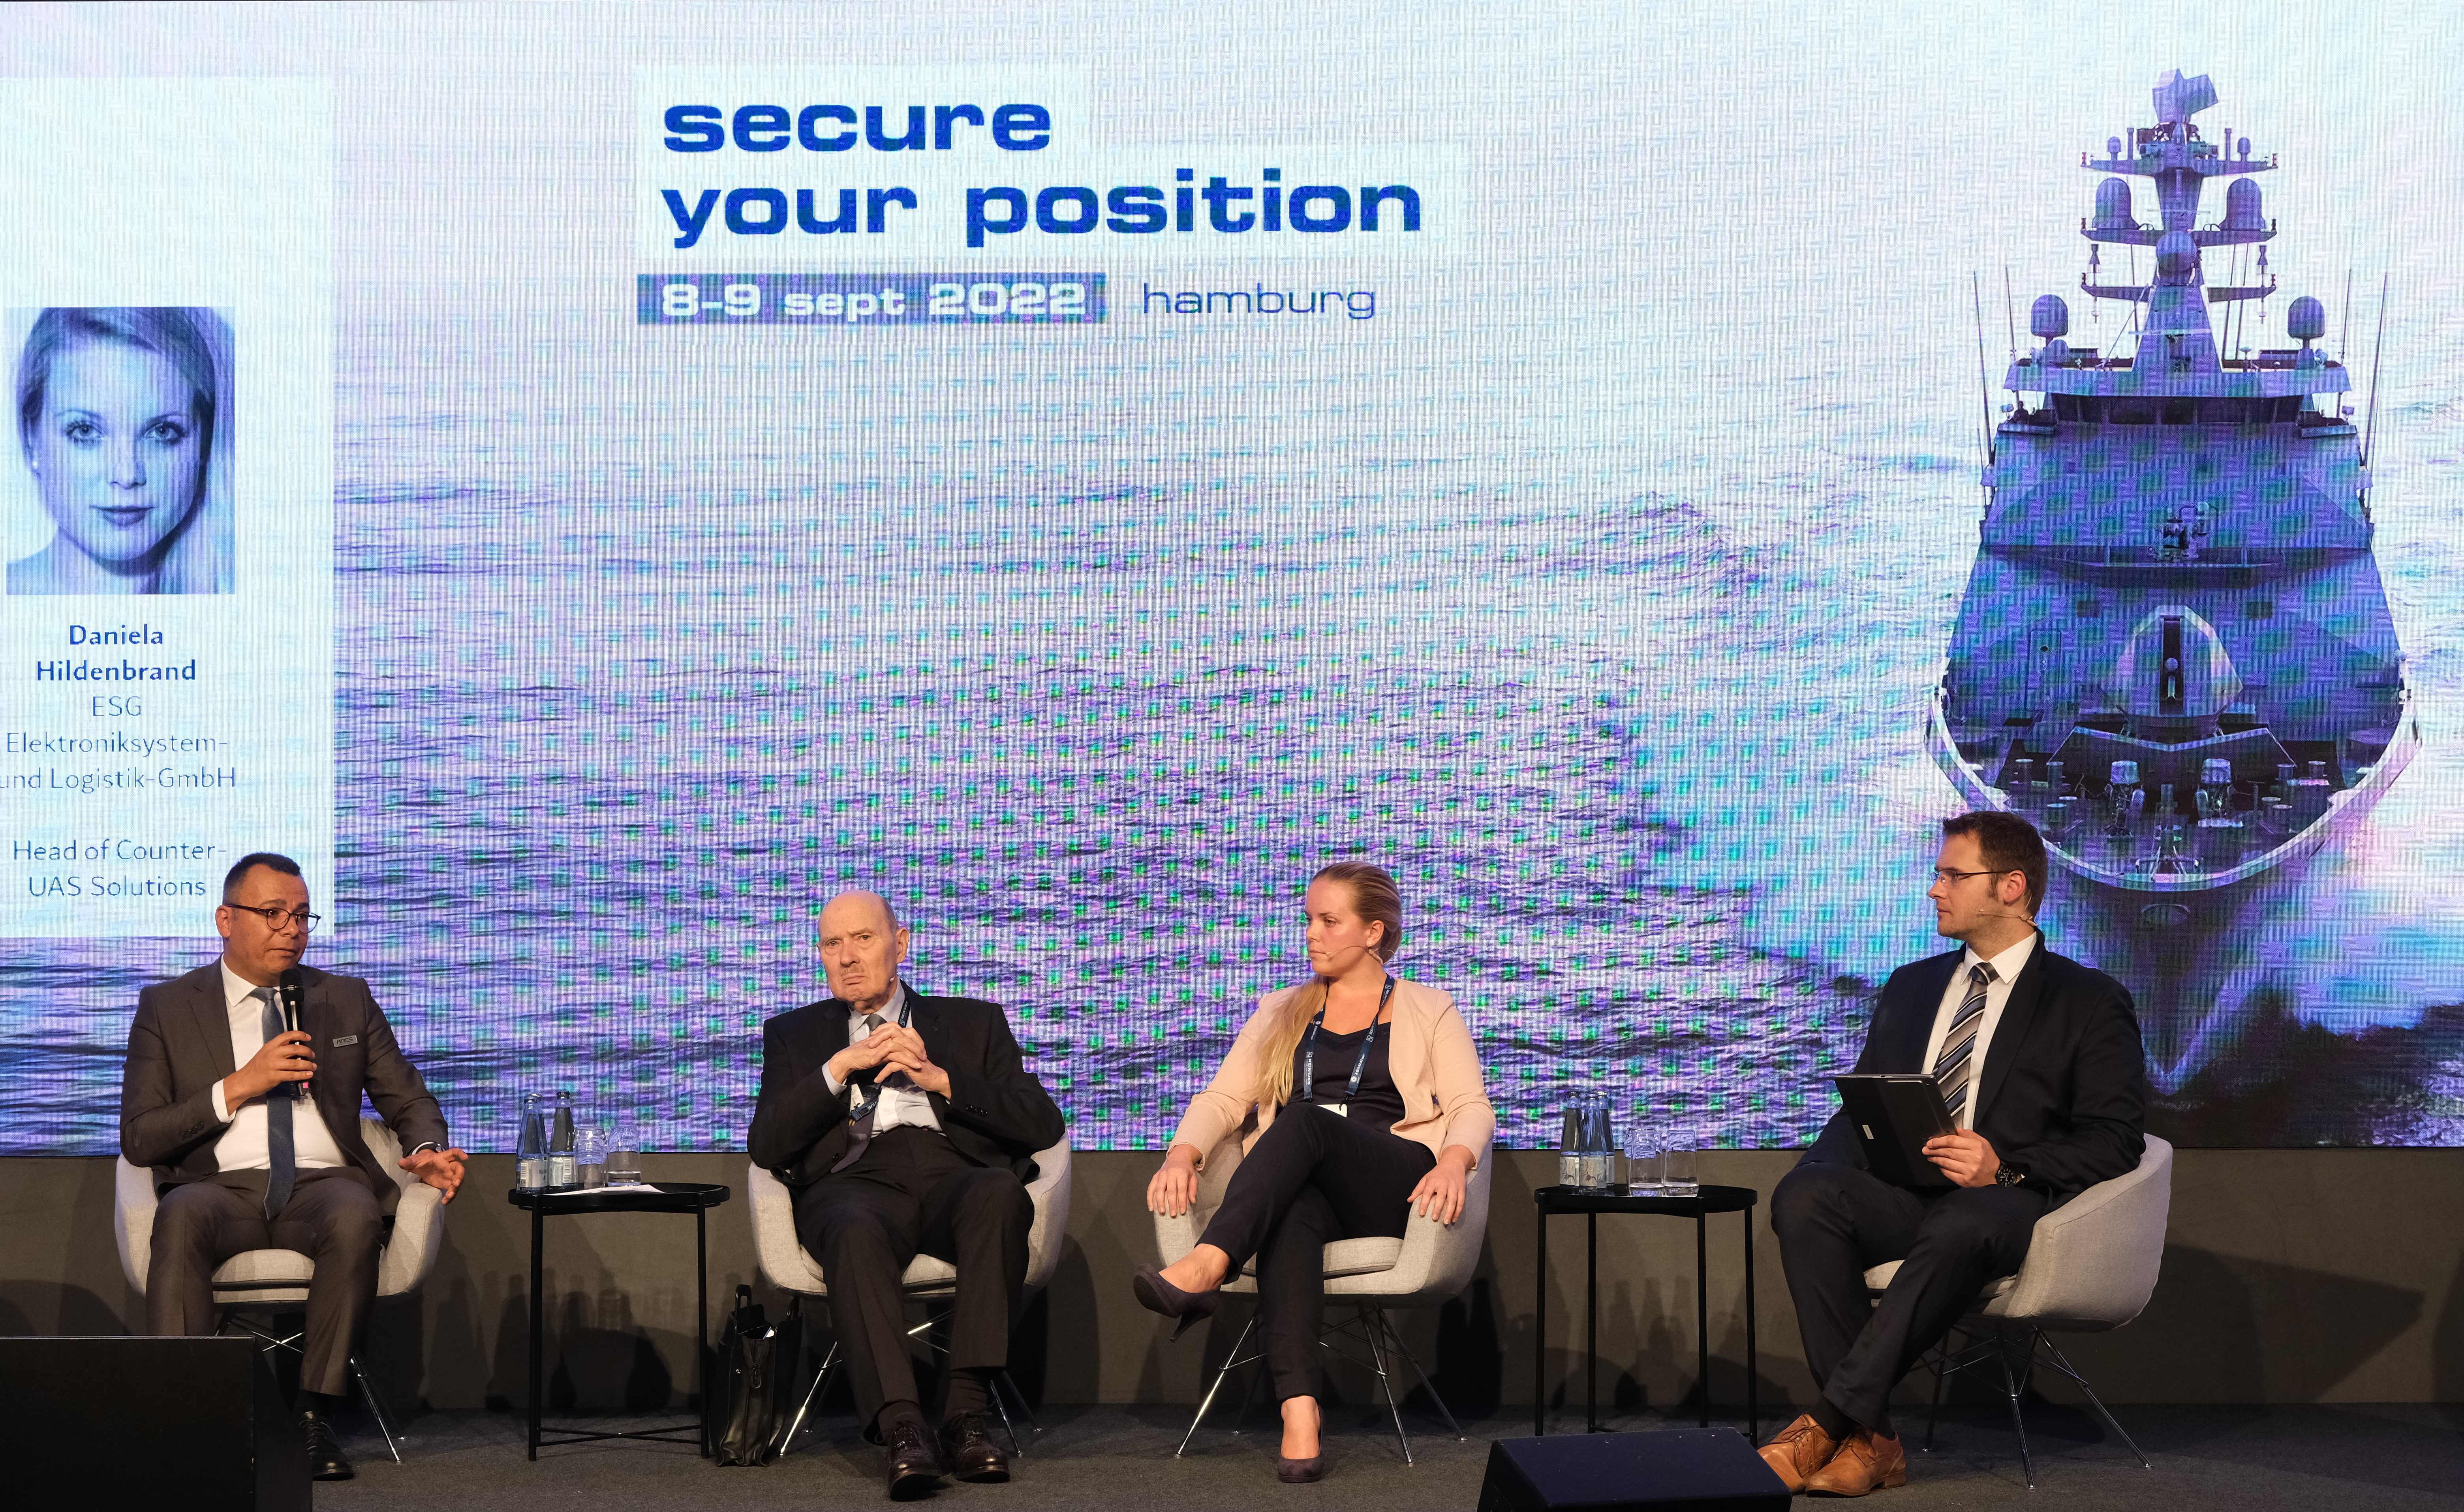 MS&D, the international conference on maritime security and defence - Blick auf die Bühne